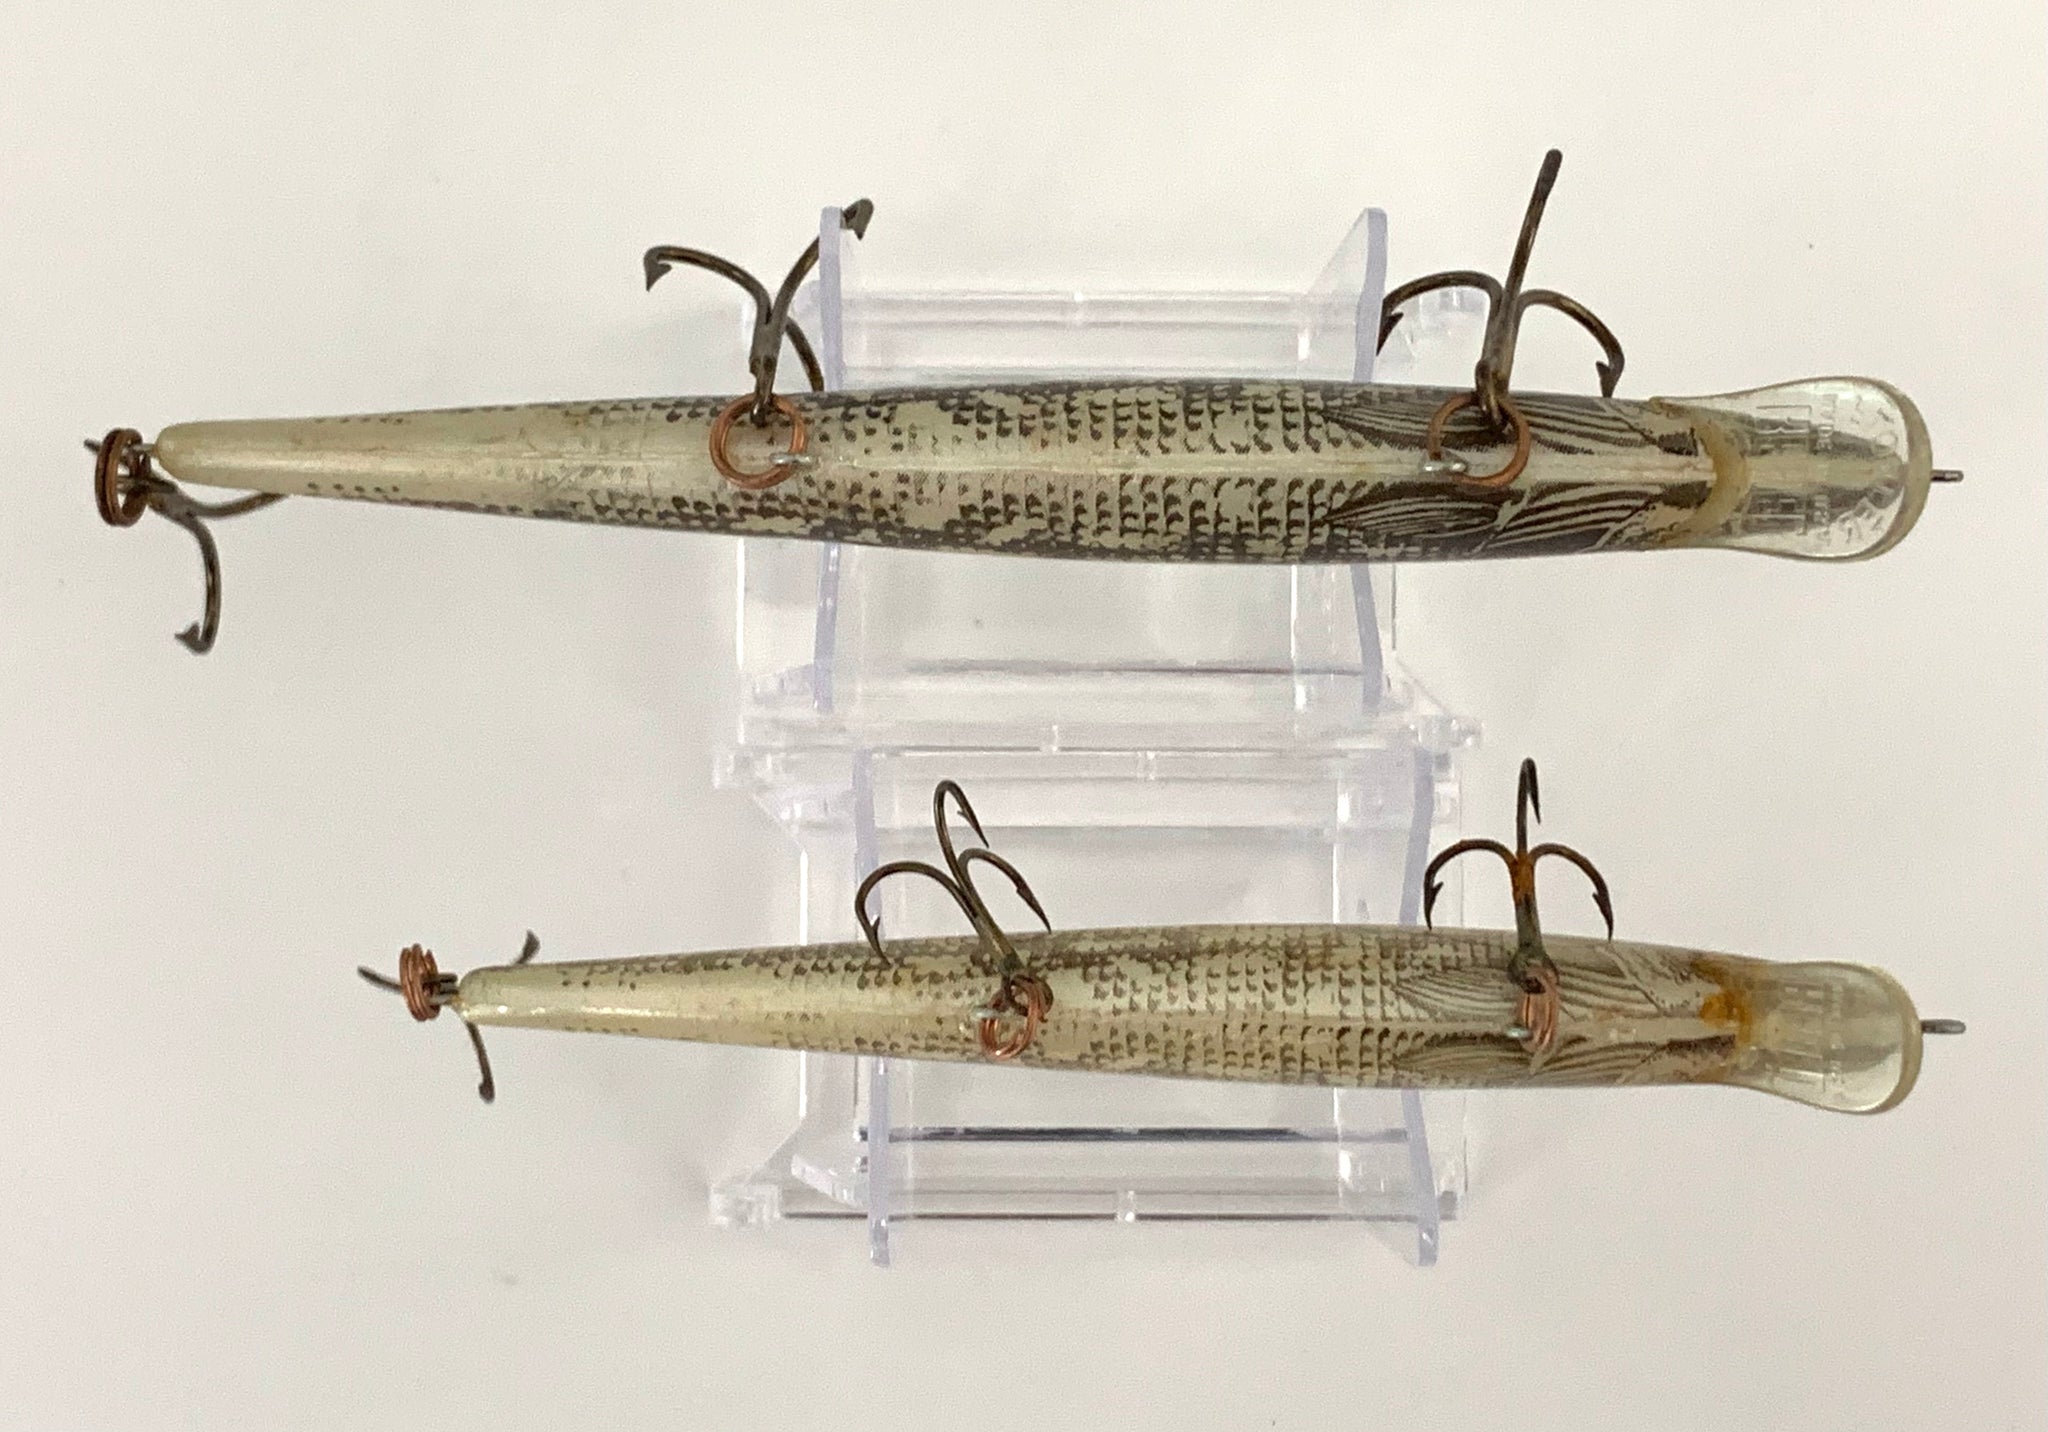 Vintage REBEL LURES DOUBLE TOP PROP BAIT SURFACE MINNOW Fishing